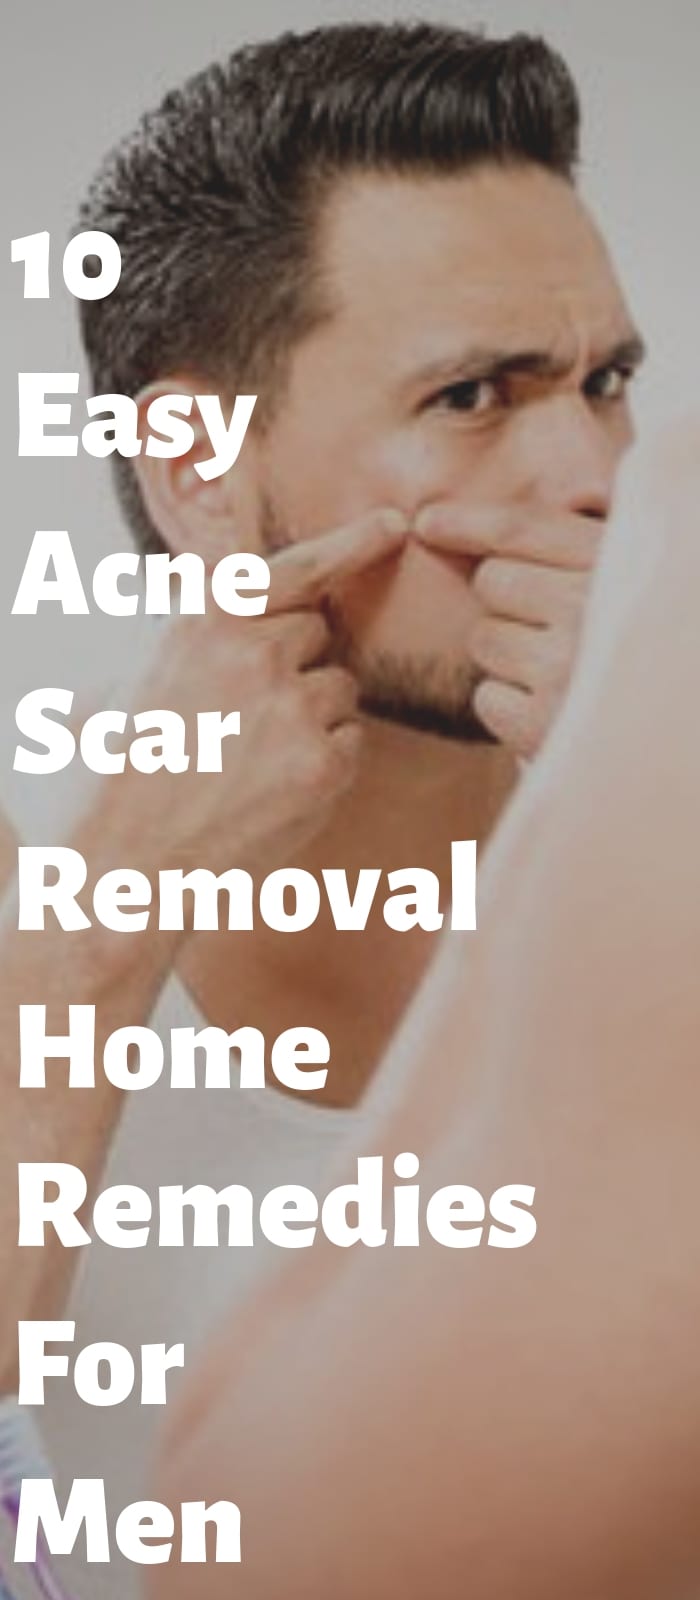 10 Easy Acne Scar Removal Home Remedies For Men.